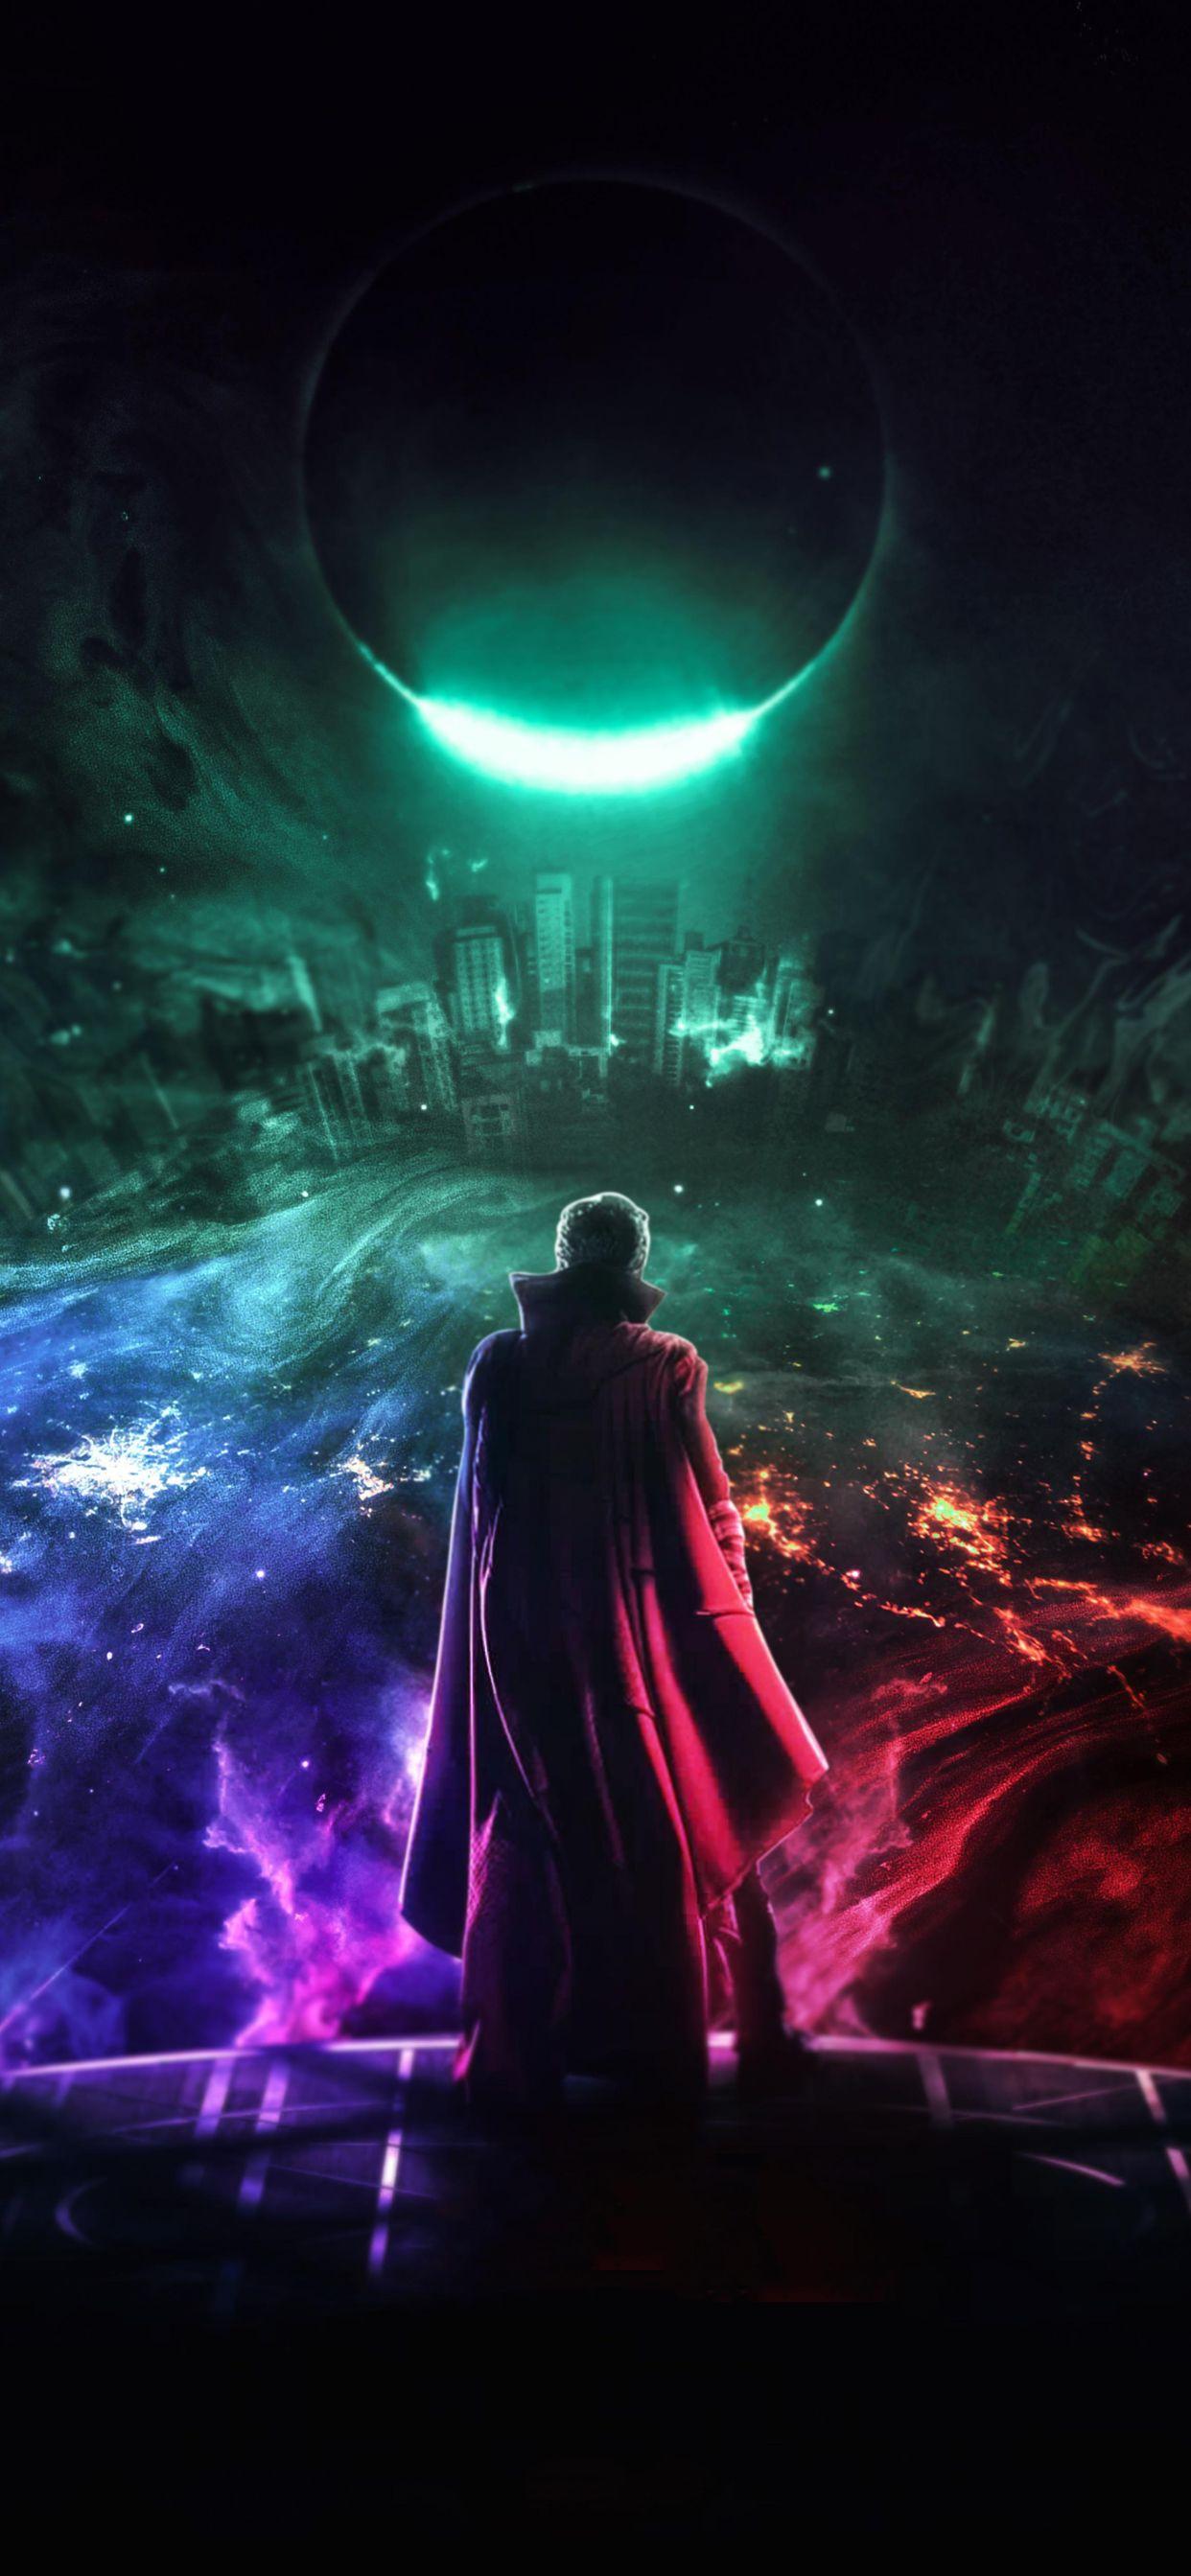 free Doctor Strange in the Multiverse of M for iphone download